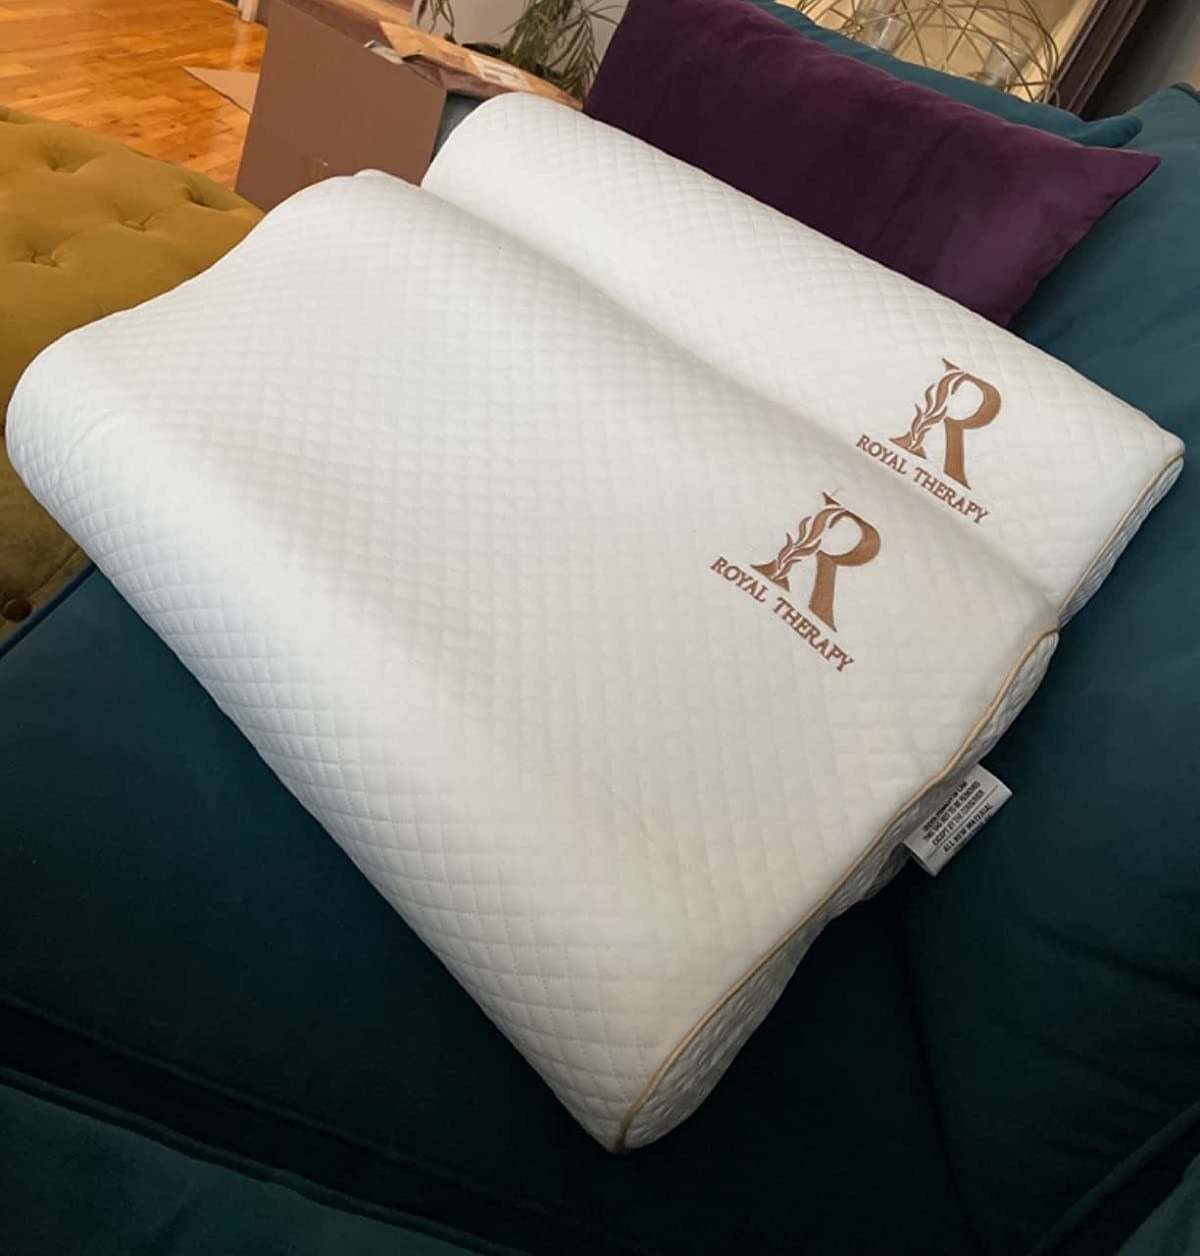 Reviewer image of two memory foam pillows on their couch